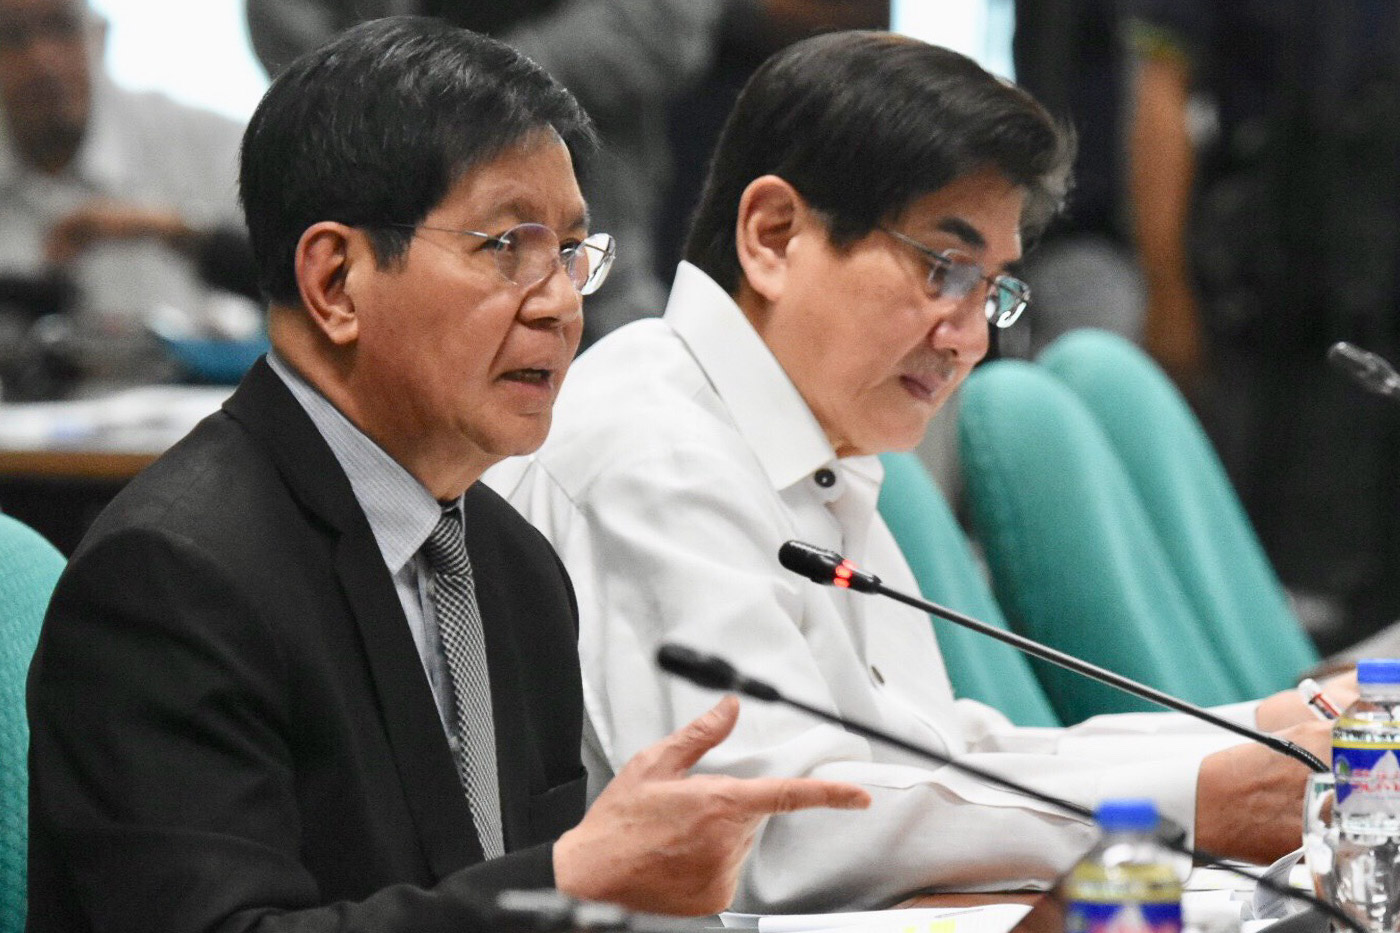 SECURITY. Senator Panfilo Lacson during the Senate hearing on the amendment of the Anti-Terrorism bill on October 1, 2018. Photo by Angie de Silva/Rappler 